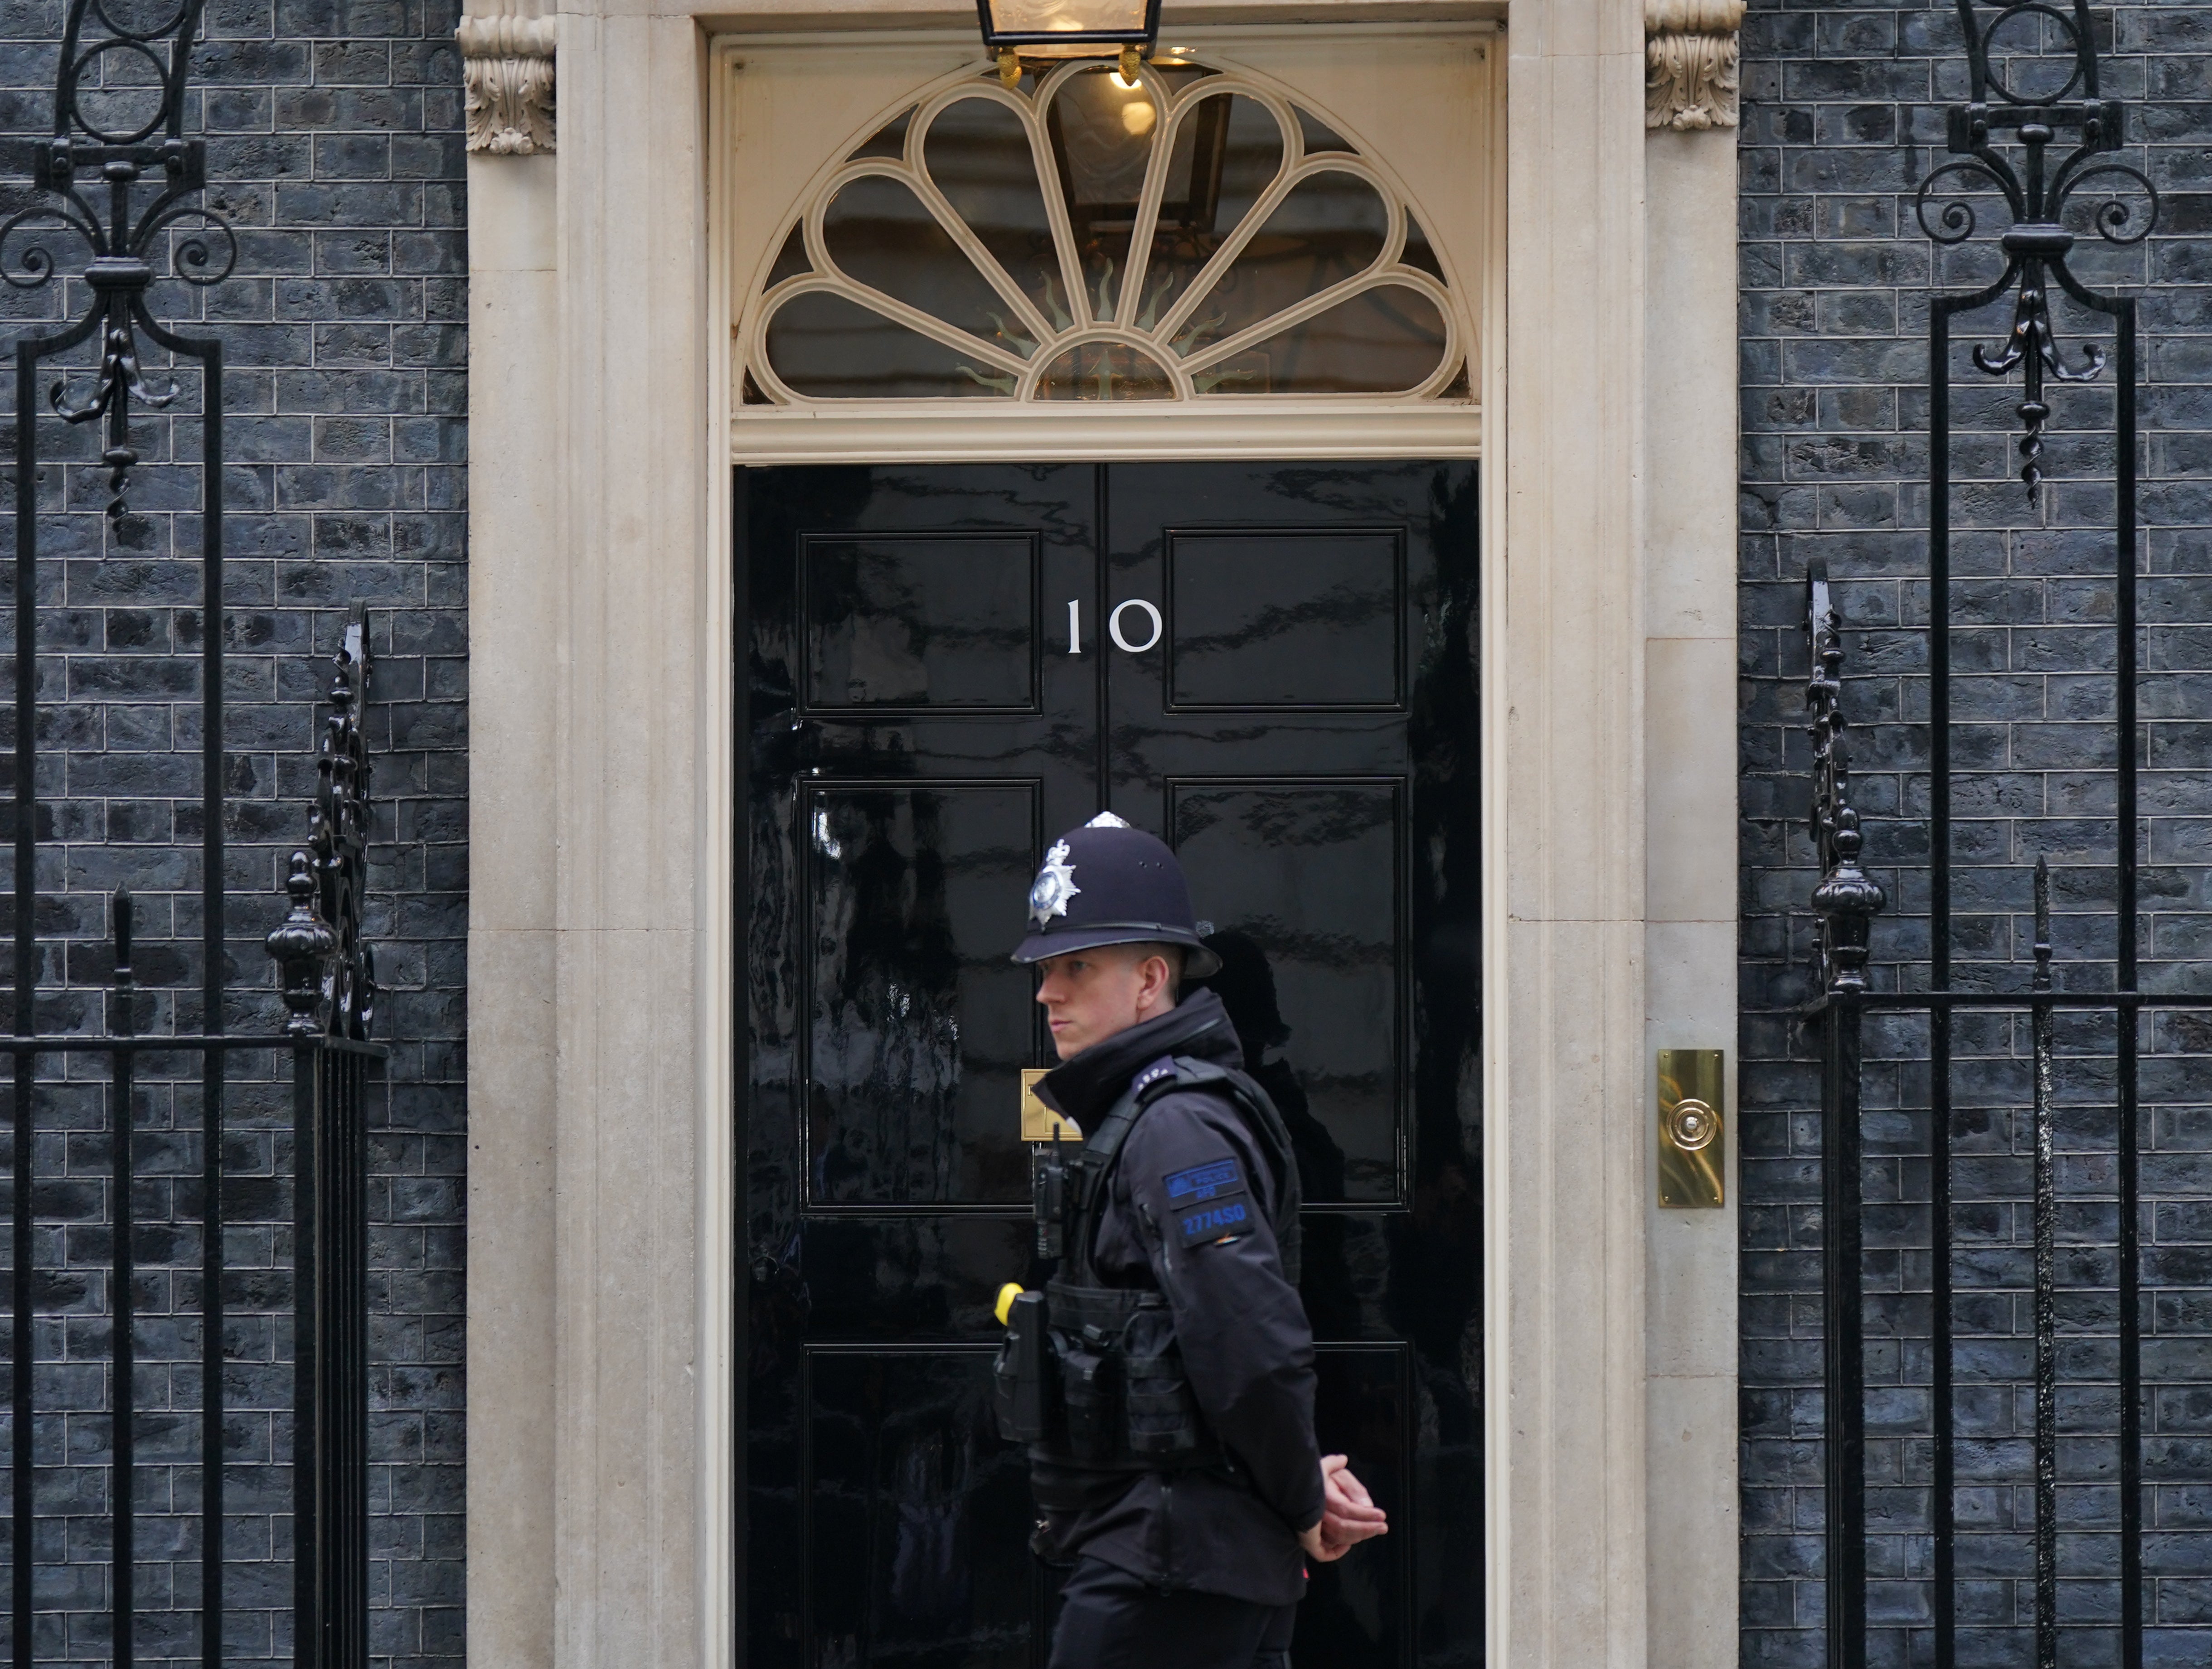 Researchers say No 10 was infected by the spyware